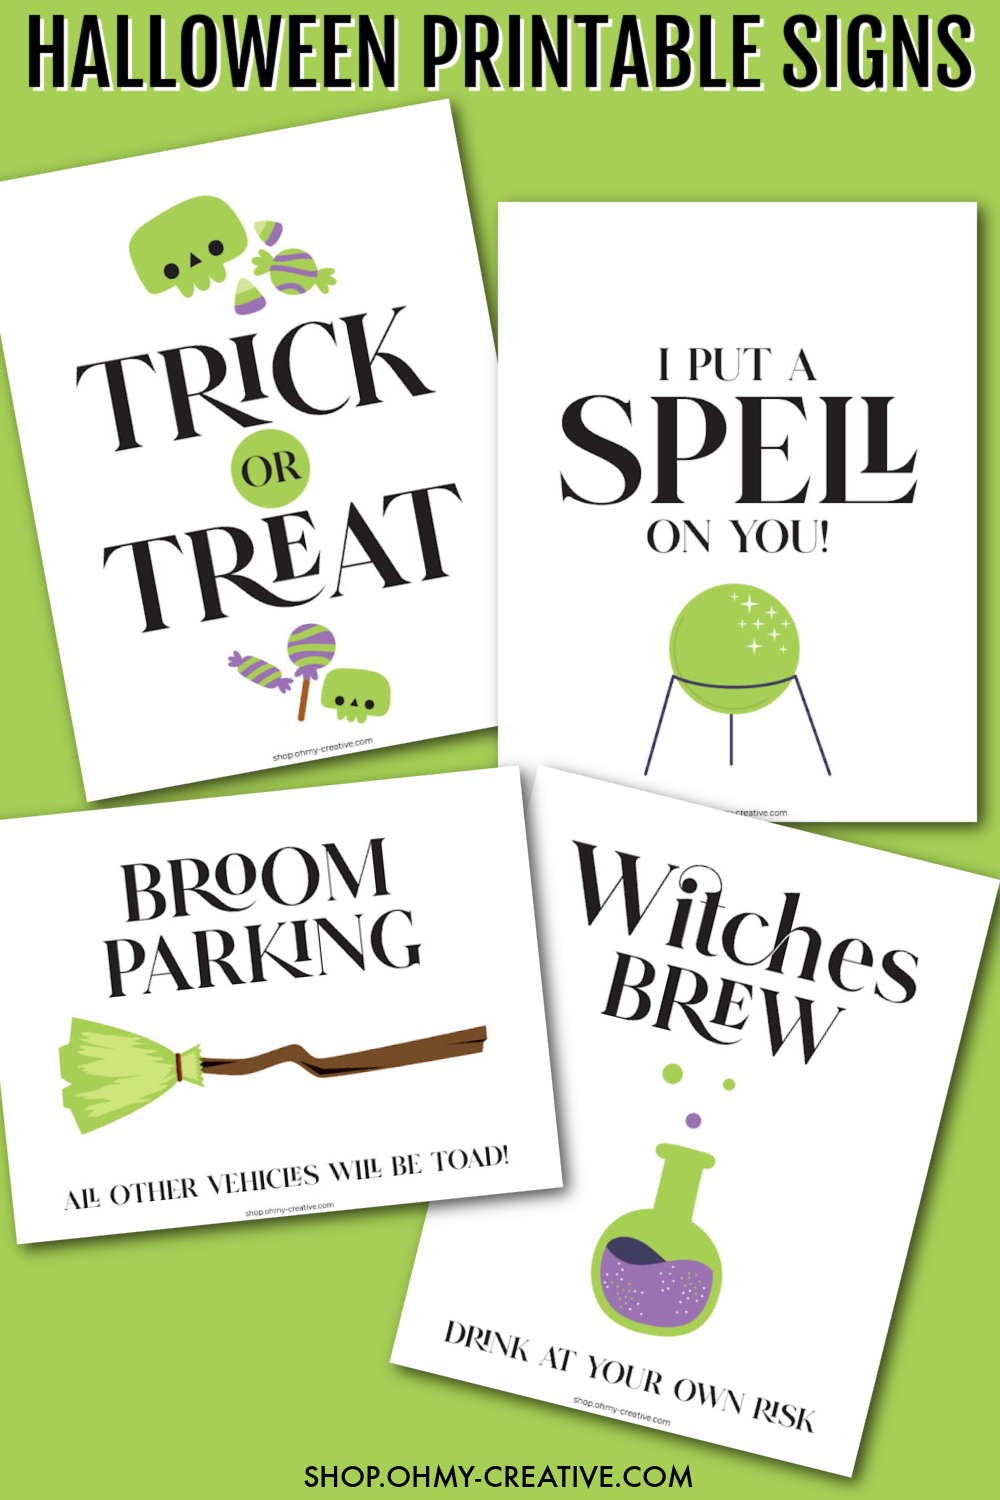 Halloween printable signs in green and purple with cute skulls, science beakers and witches broom!